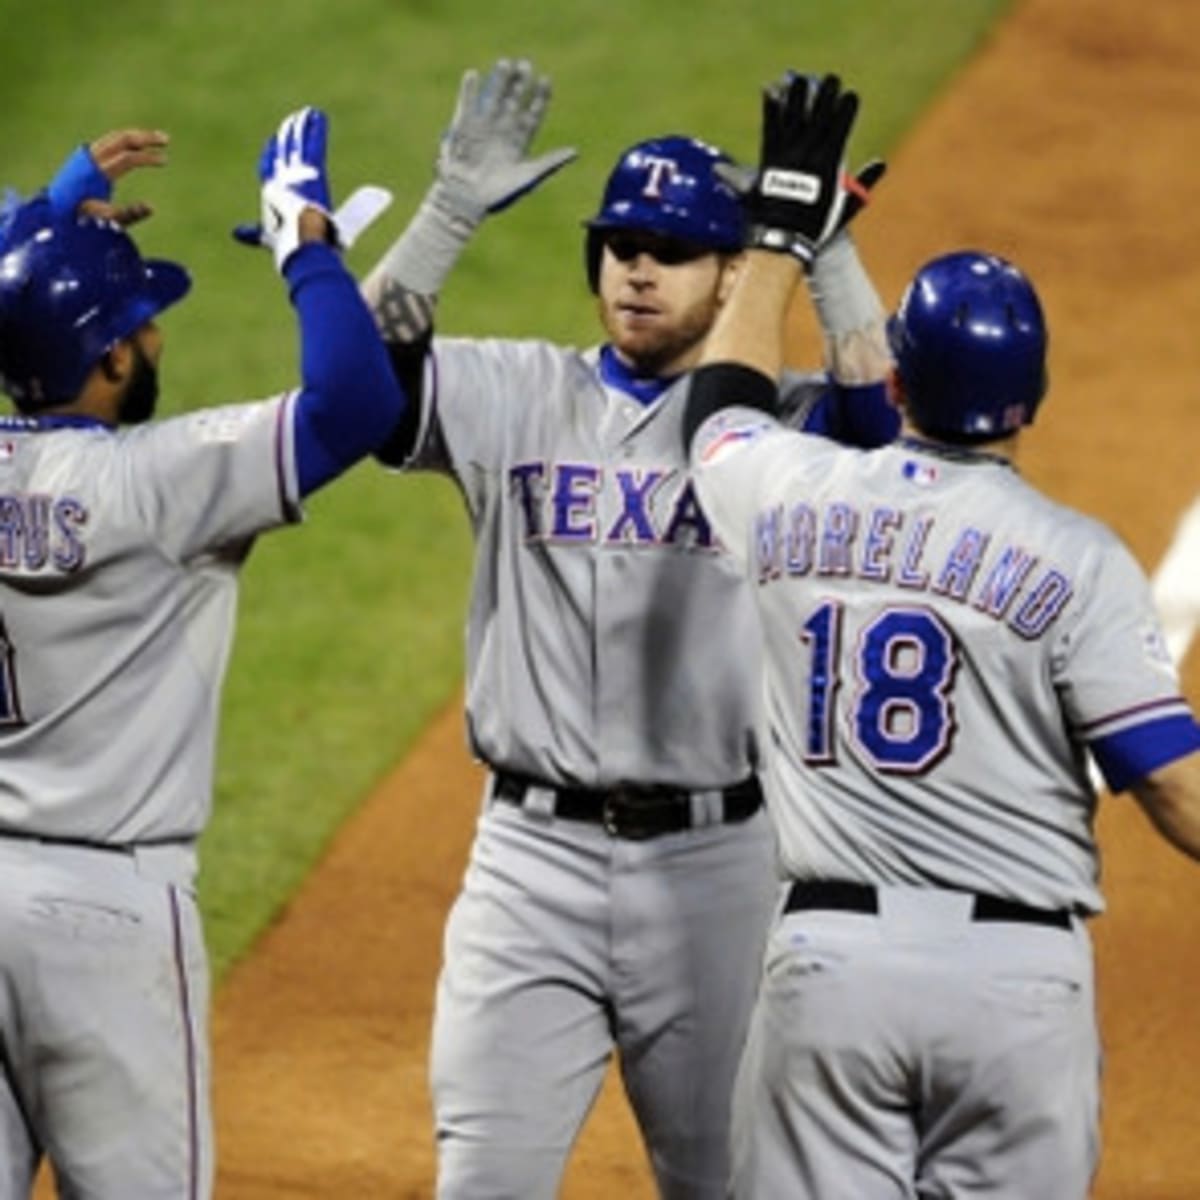 Texas Rangers Moments: Josh Hamilton's 10th Inning HR in Game 6 of